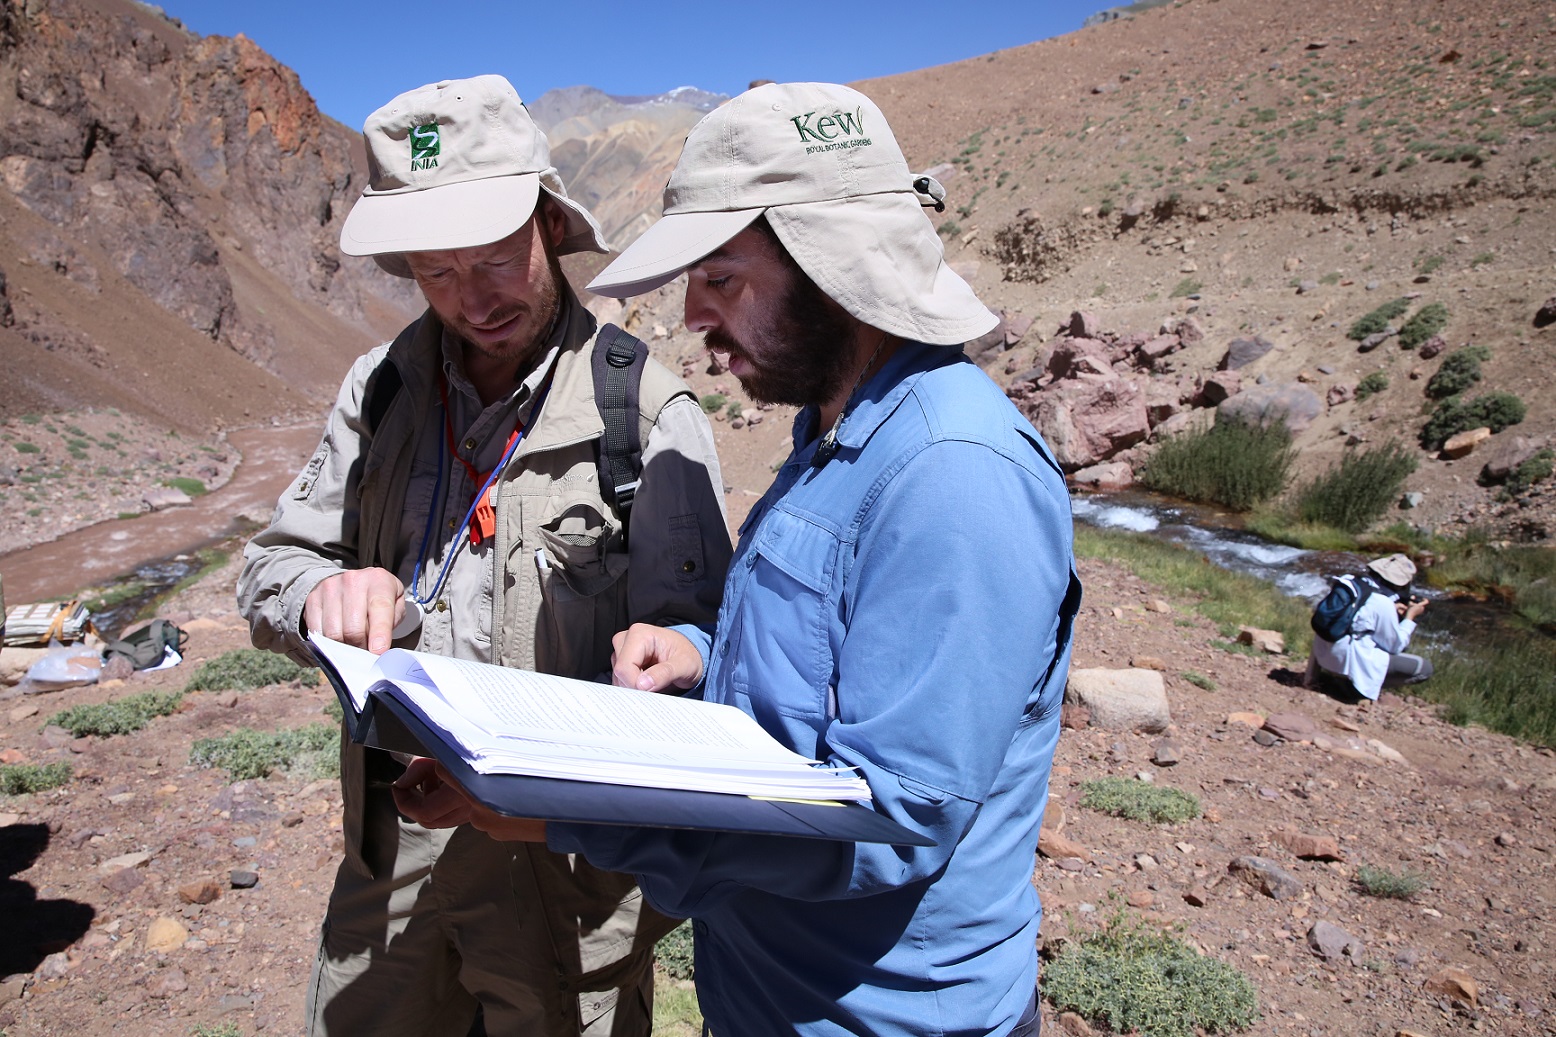 Two men stood looking at a clipboard. They are standing in a river valley with rocky slopes and sparse ground vegetation. They are both wearing baseball hats with INIA and Kew written on.